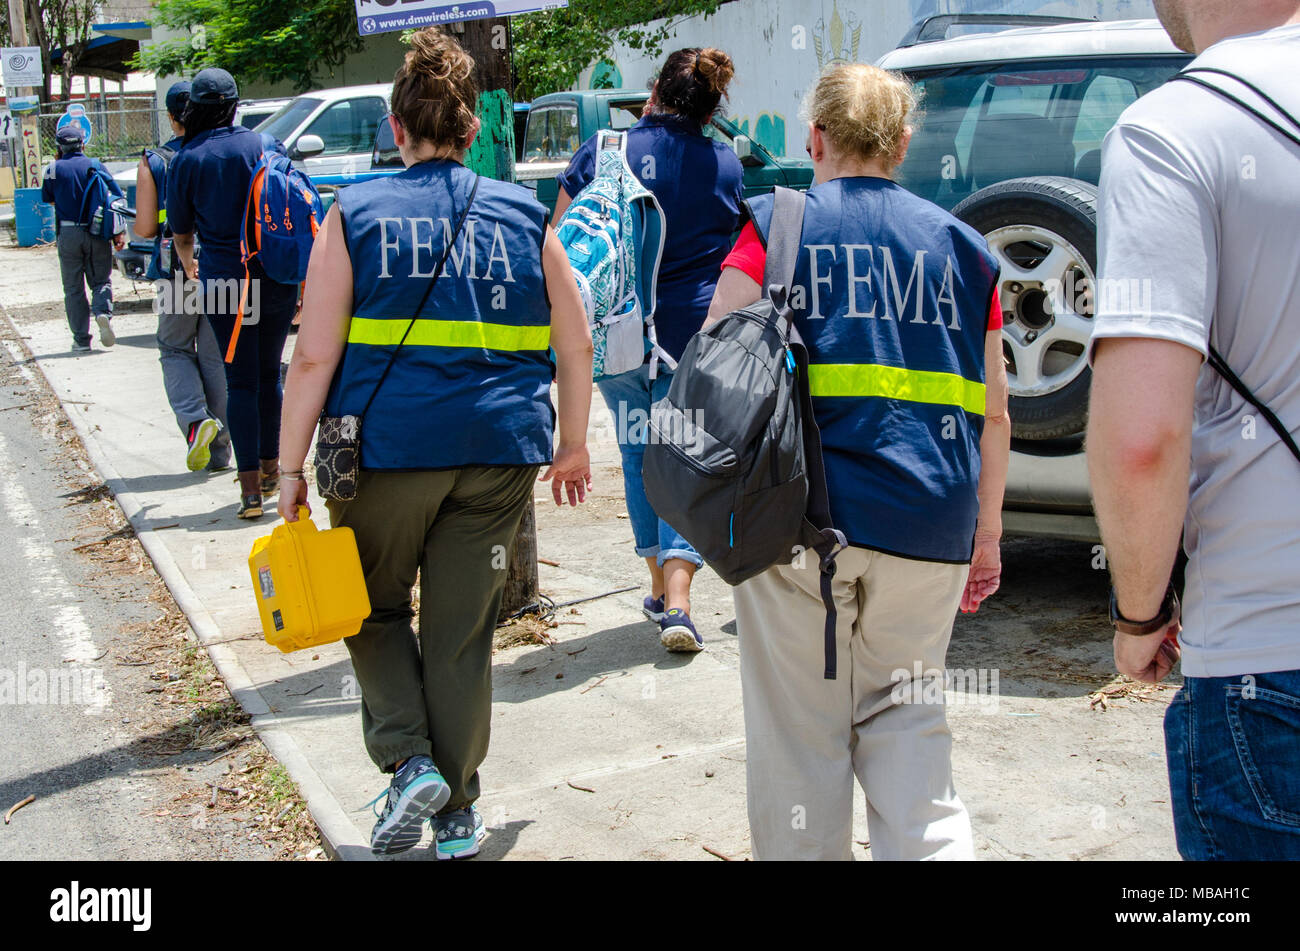 Culebra, PR, Sep. 11, 2017 -- A Disaster Survivor Assistance team is here to meet with the Mayor about setting up a site for survivors of Hurricane Irma to register with FEMA for assistance. Team members spoke with residents and posted information in local businesses about contacting FEMA for help. Stock Photo